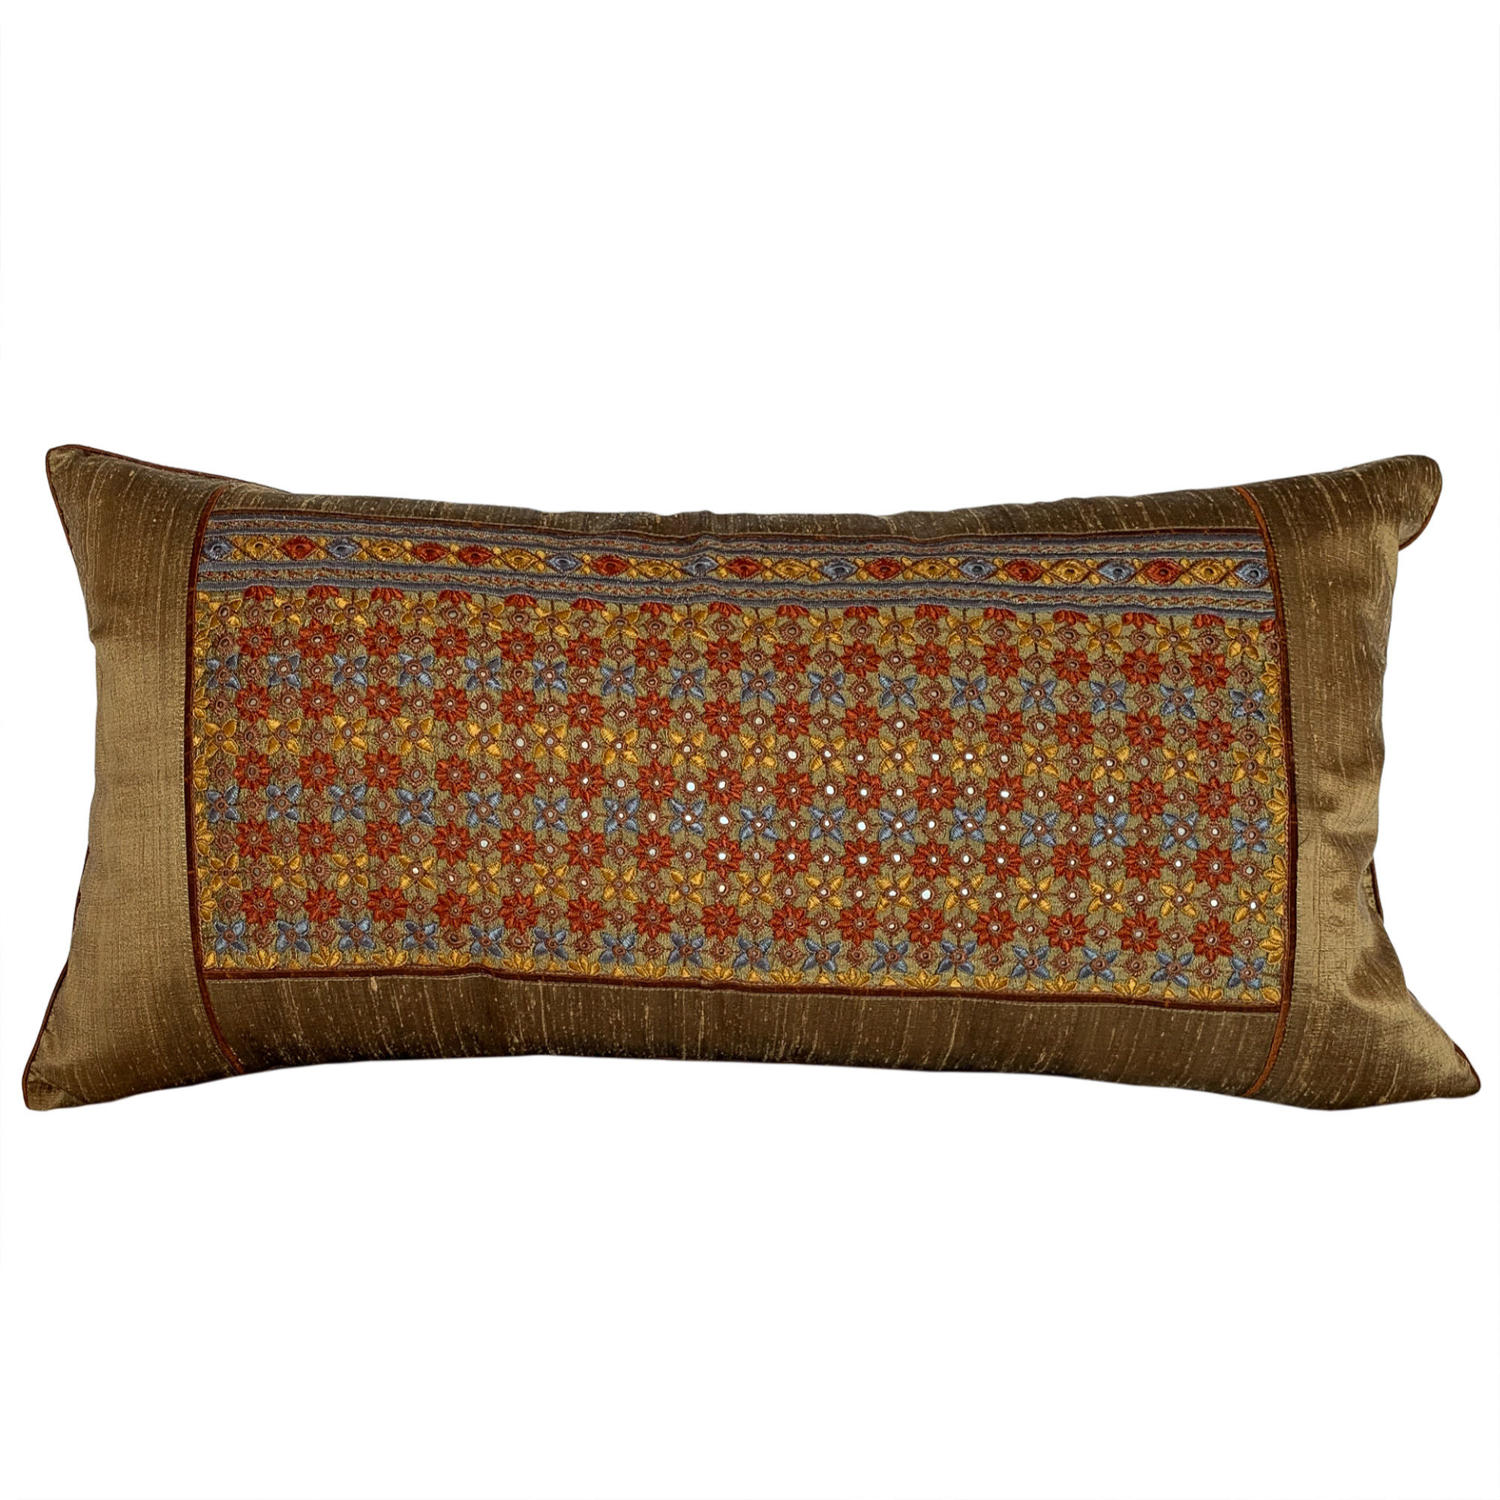 Shrujan hand embriodered cushions